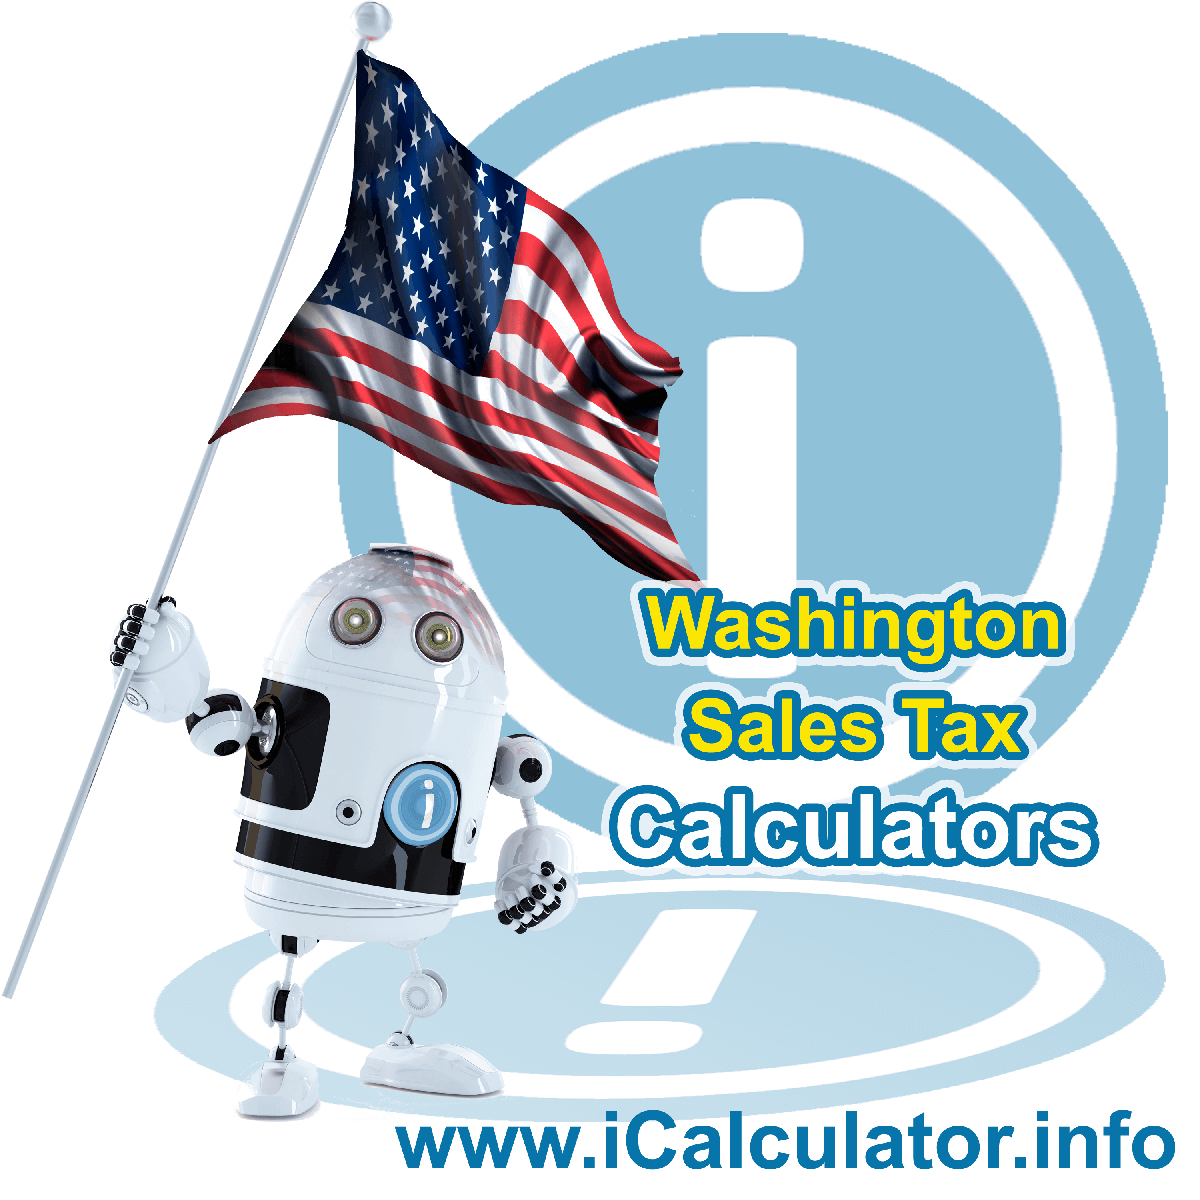 Nespelem Sales Rates: This image illustrates a calculator robot calculating Nespelem sales tax manually using the Nespelem Sales Tax Formula. You can use this information to calculate Nespelem Sales Tax manually or use the Nespelem Sales Tax Calculator to calculate sales tax online.